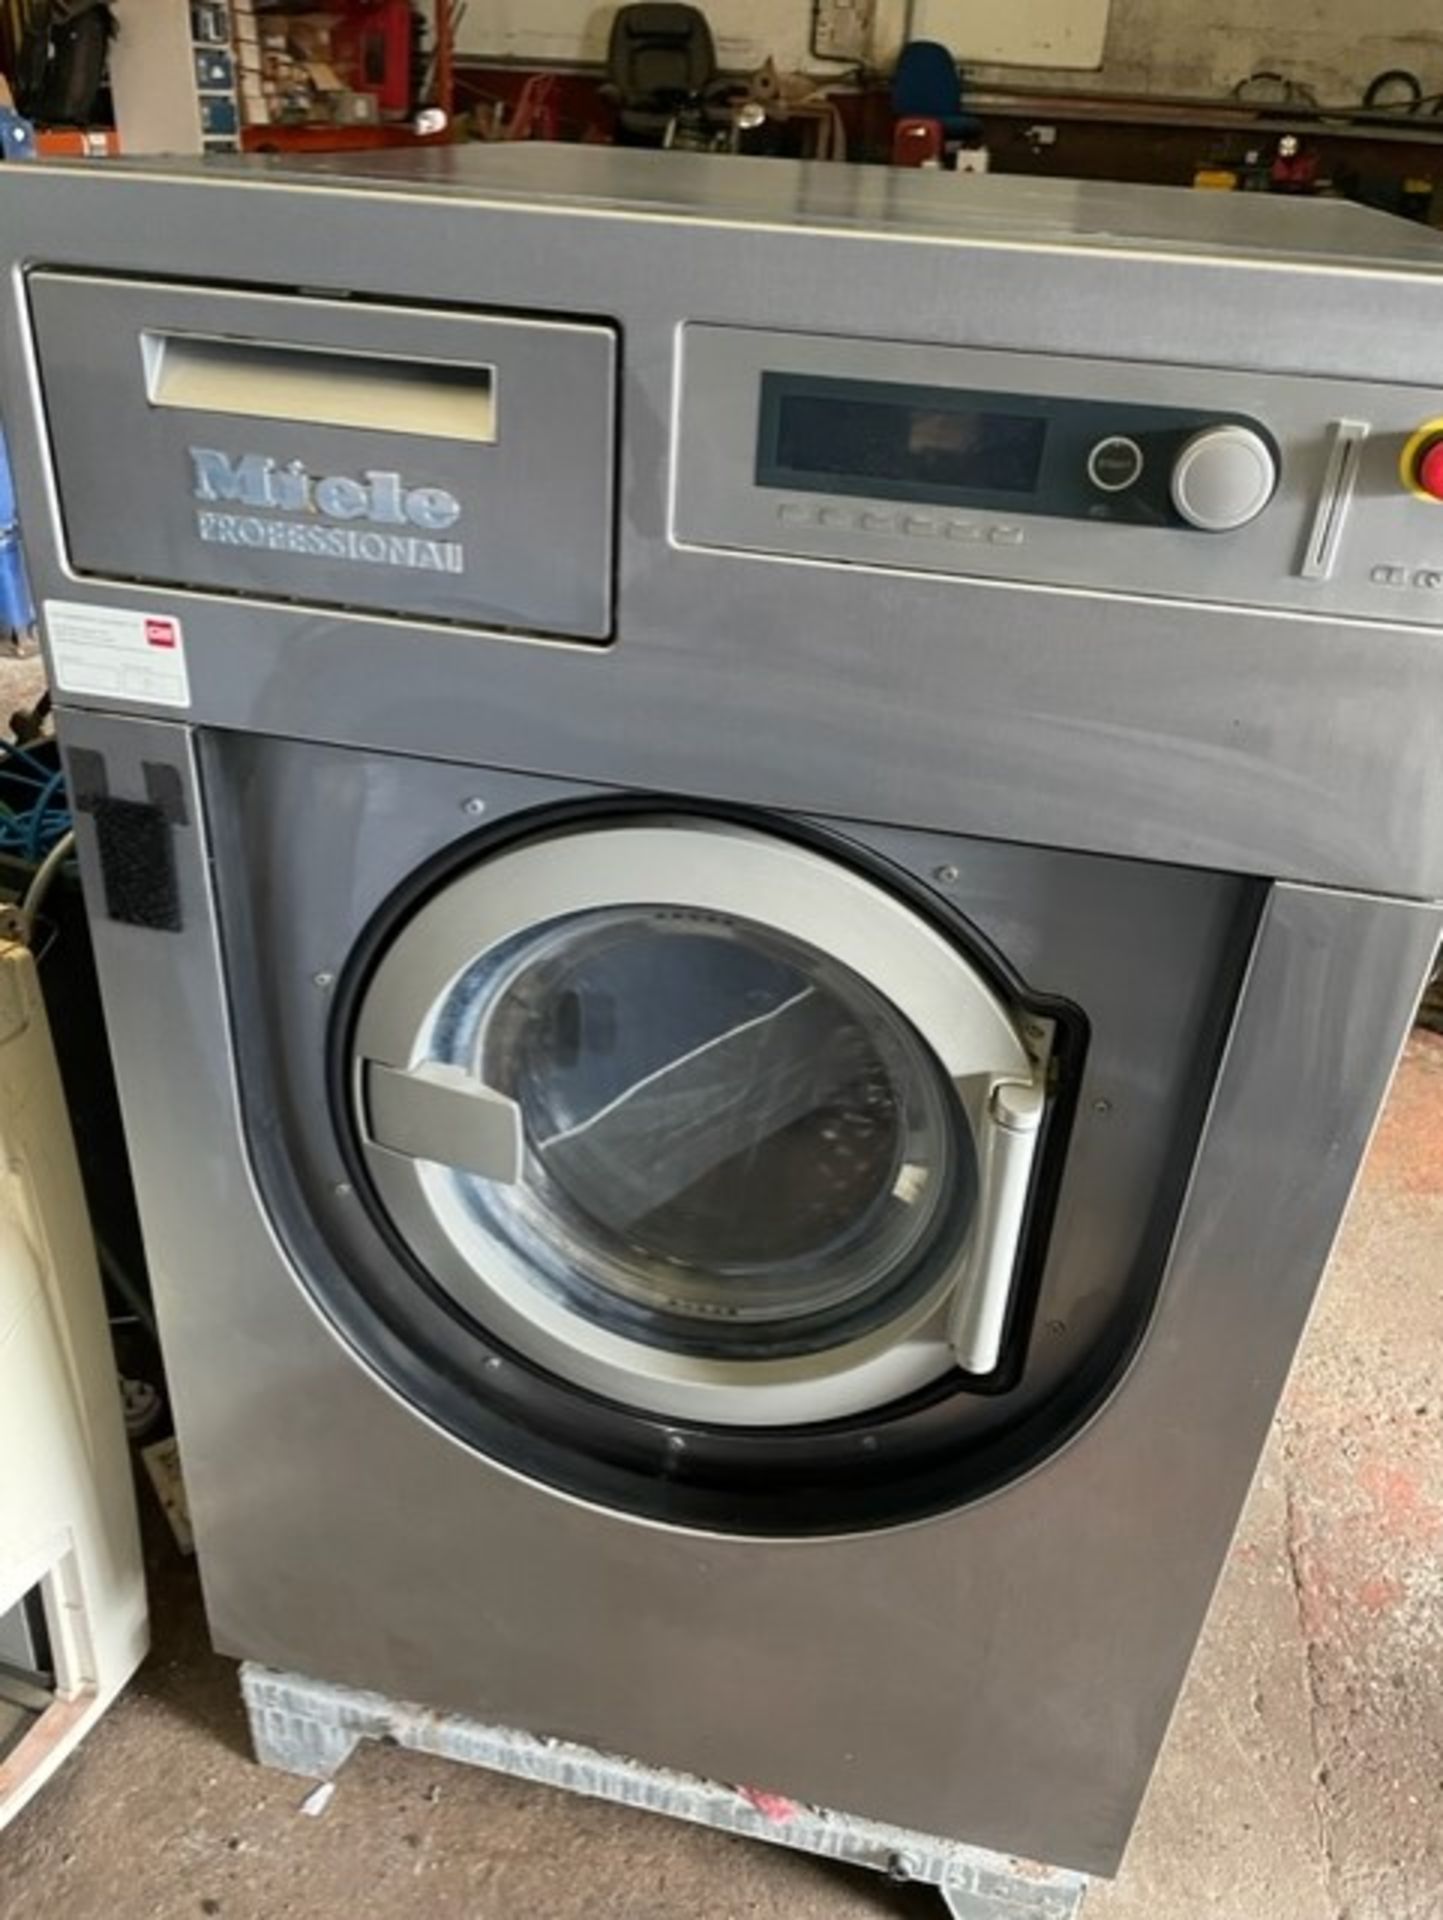 Miele washing machine 3 phase commercial it’s a pw008 and is in very good condition it has a 17kw